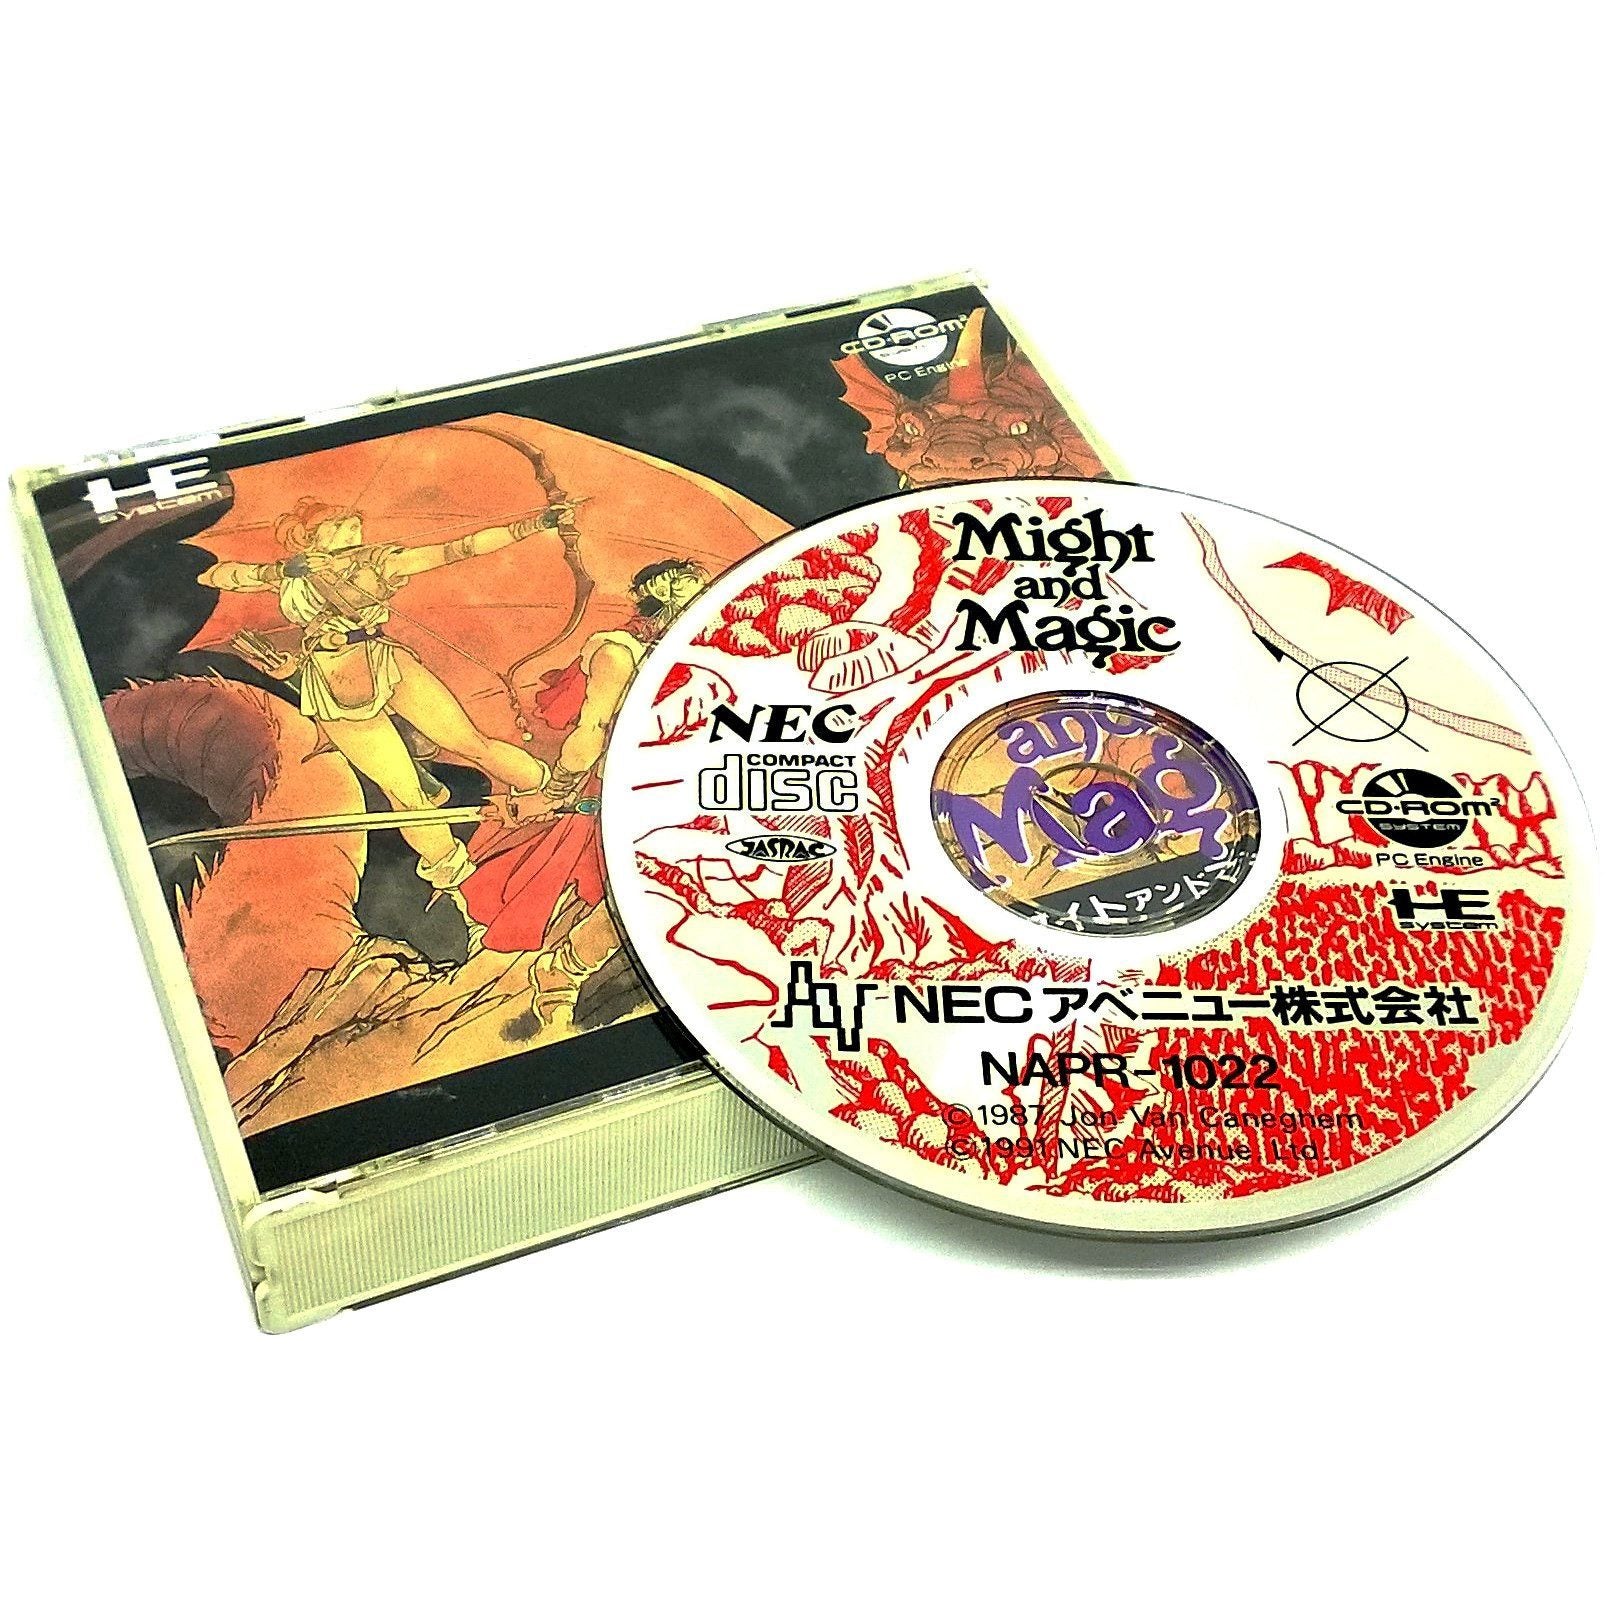 Might and Magic for PC Engine